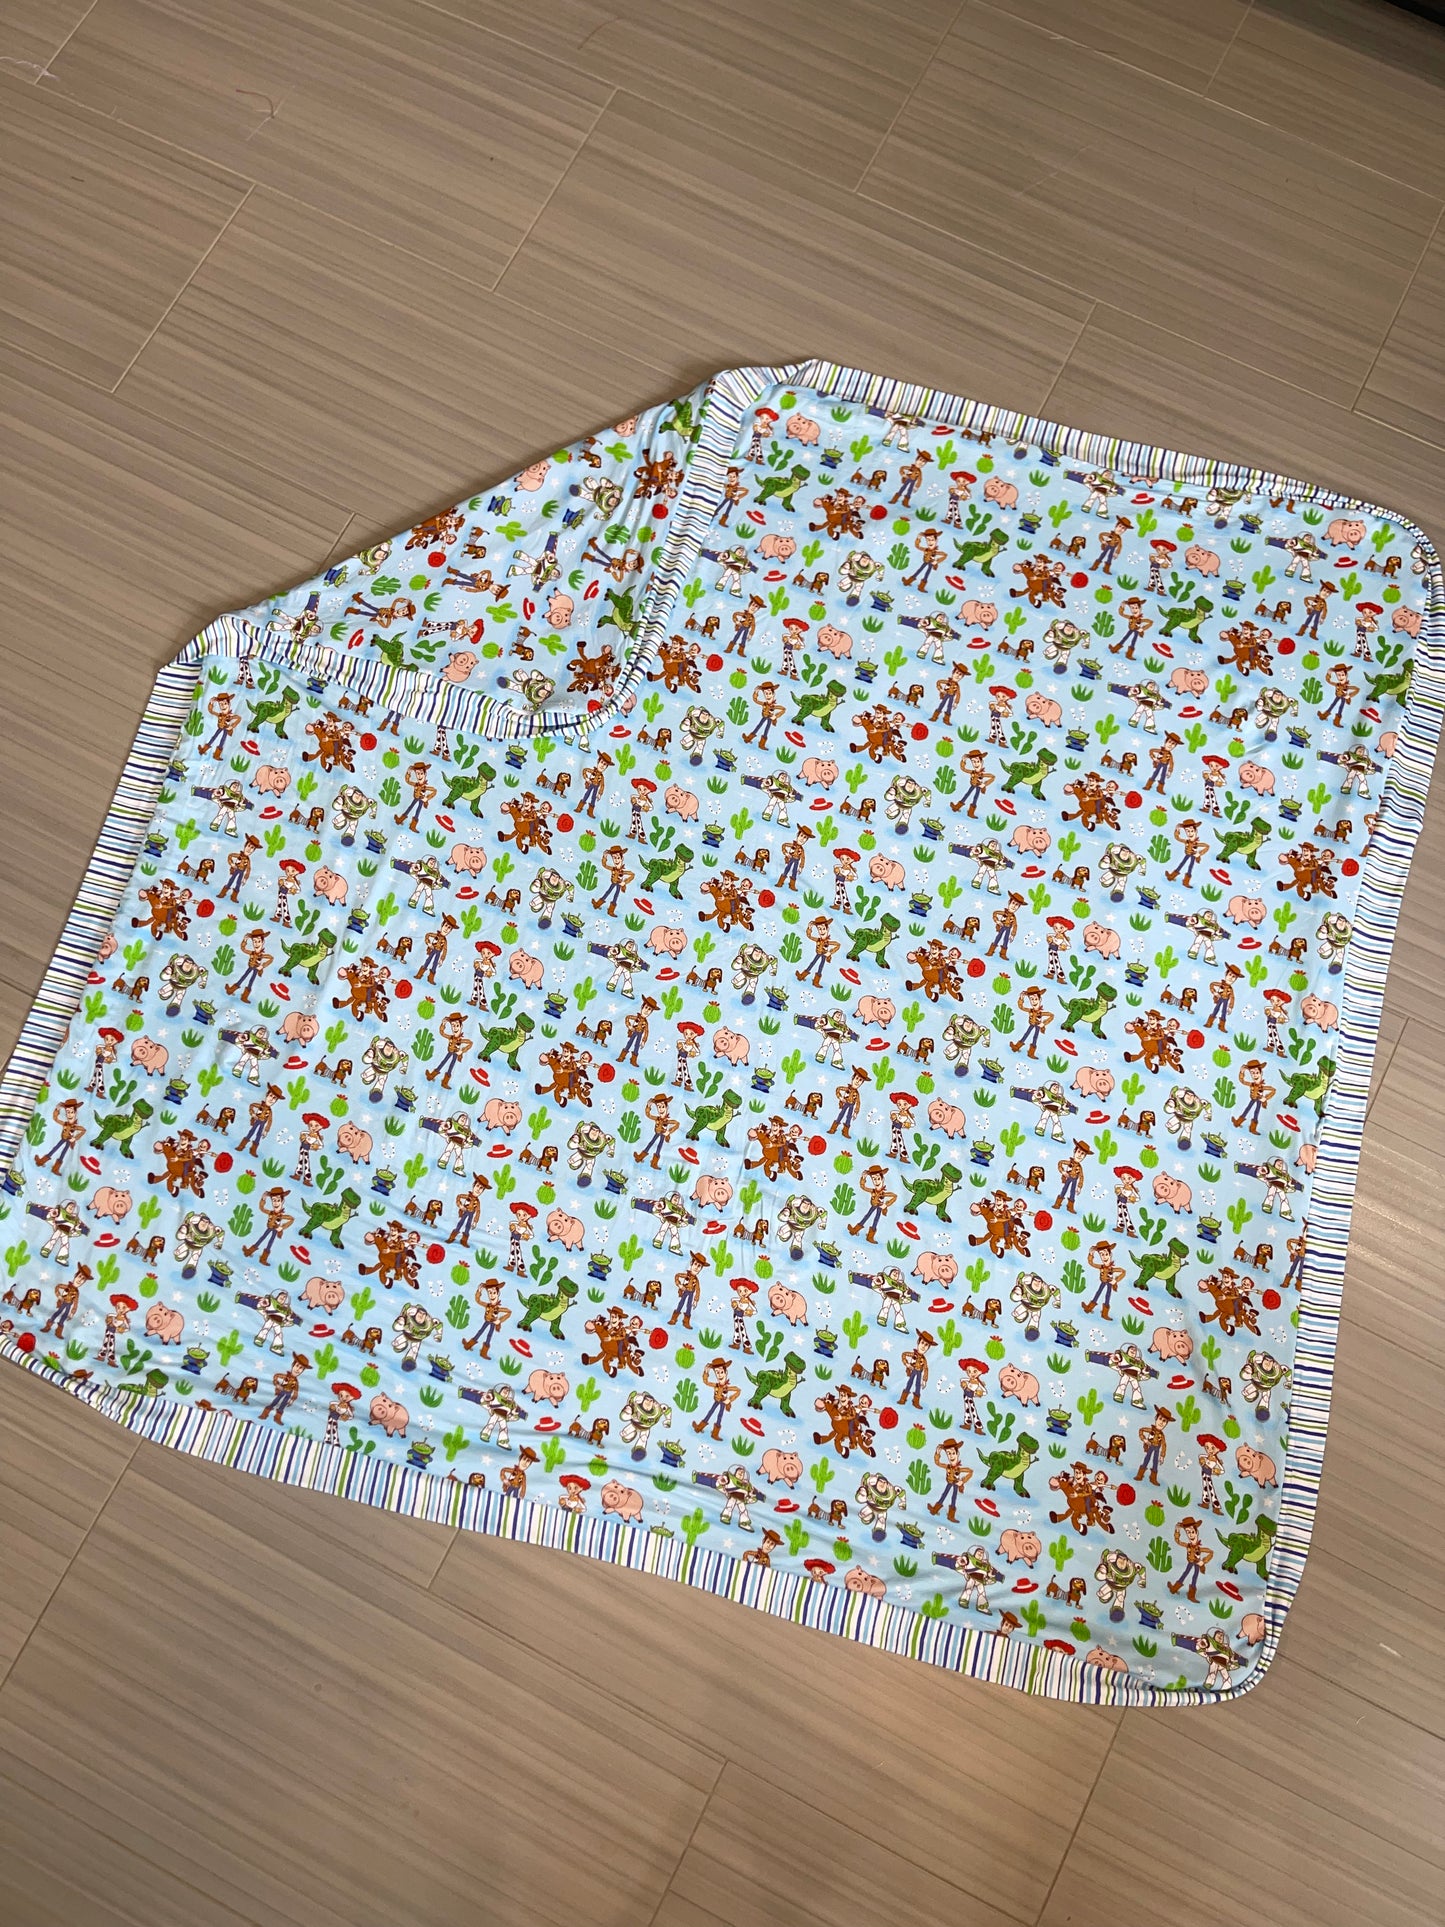 Custom Little Sleepies + Other Bamboo Blankets- Past Work, Not for Sale